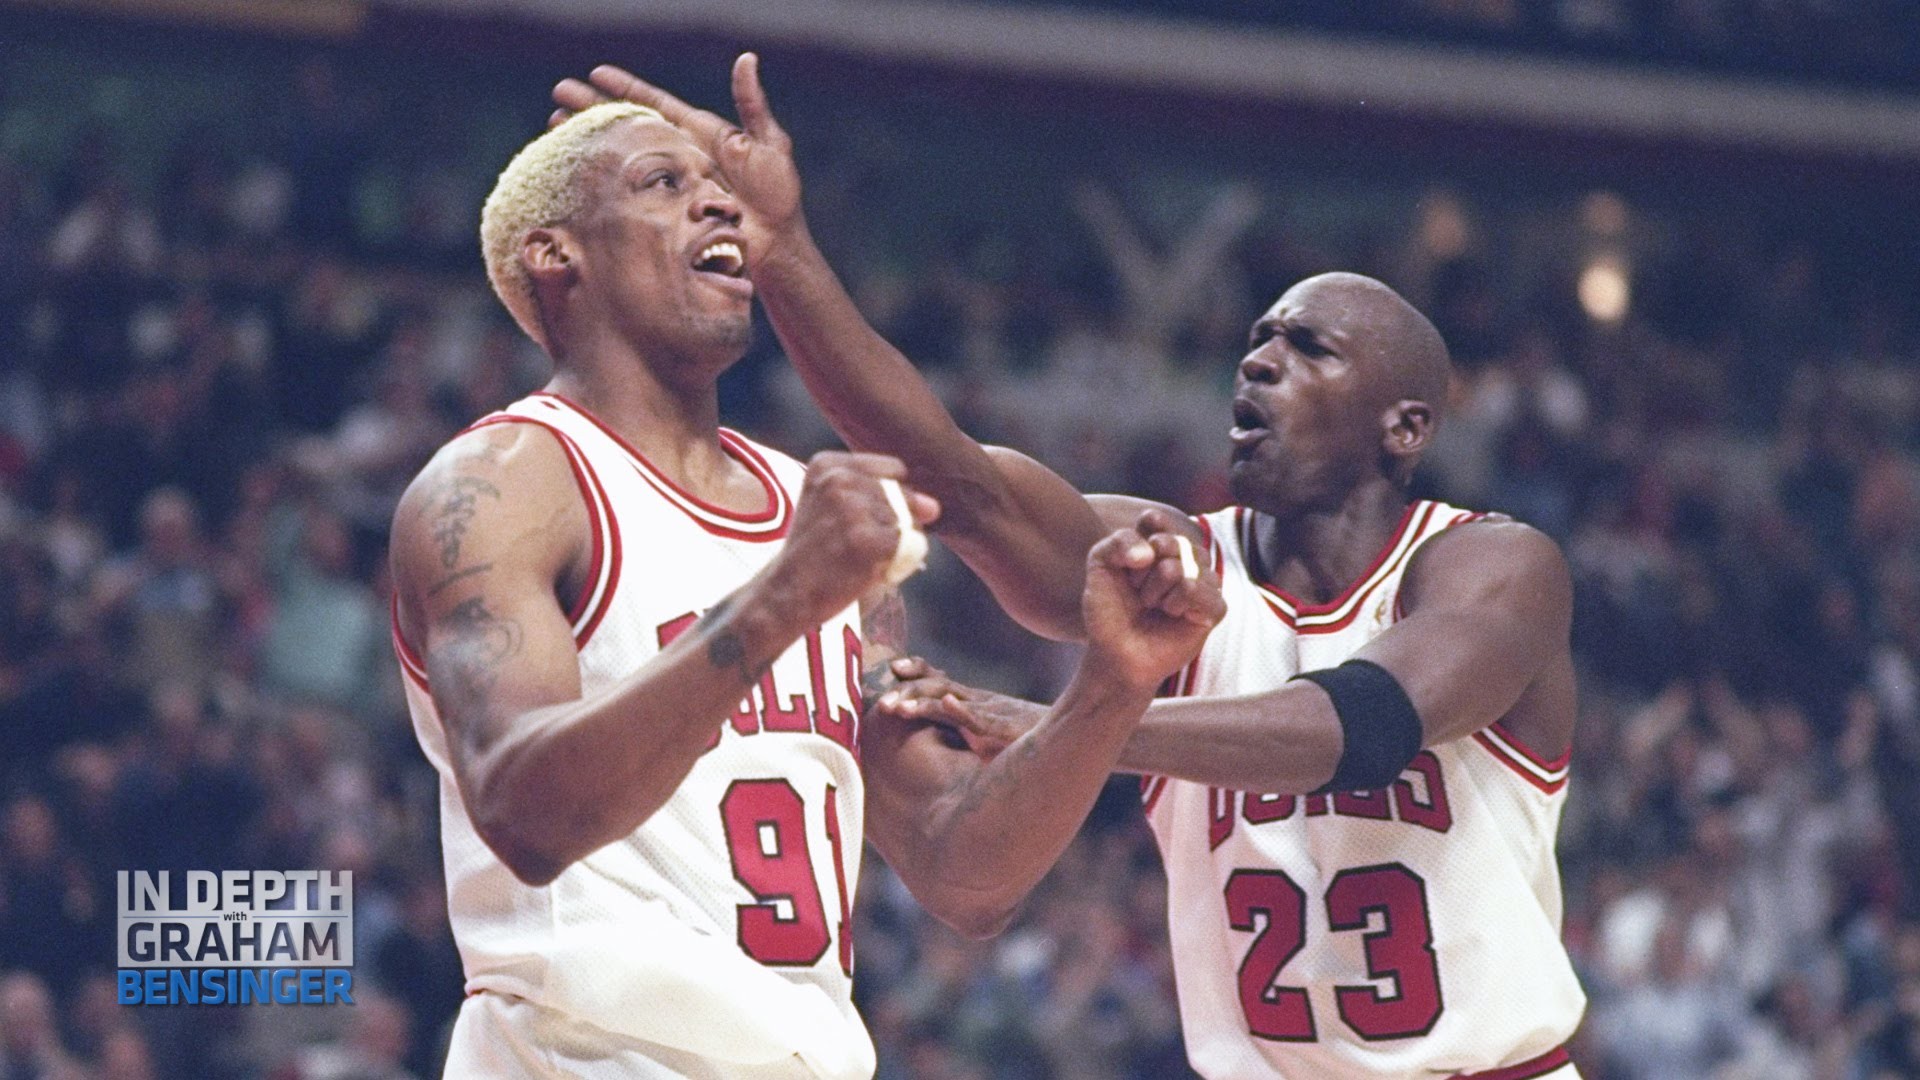 1920x1080 Dennis Rodman interview: Our Chicago Bulls could beat any team ever -  YouTube